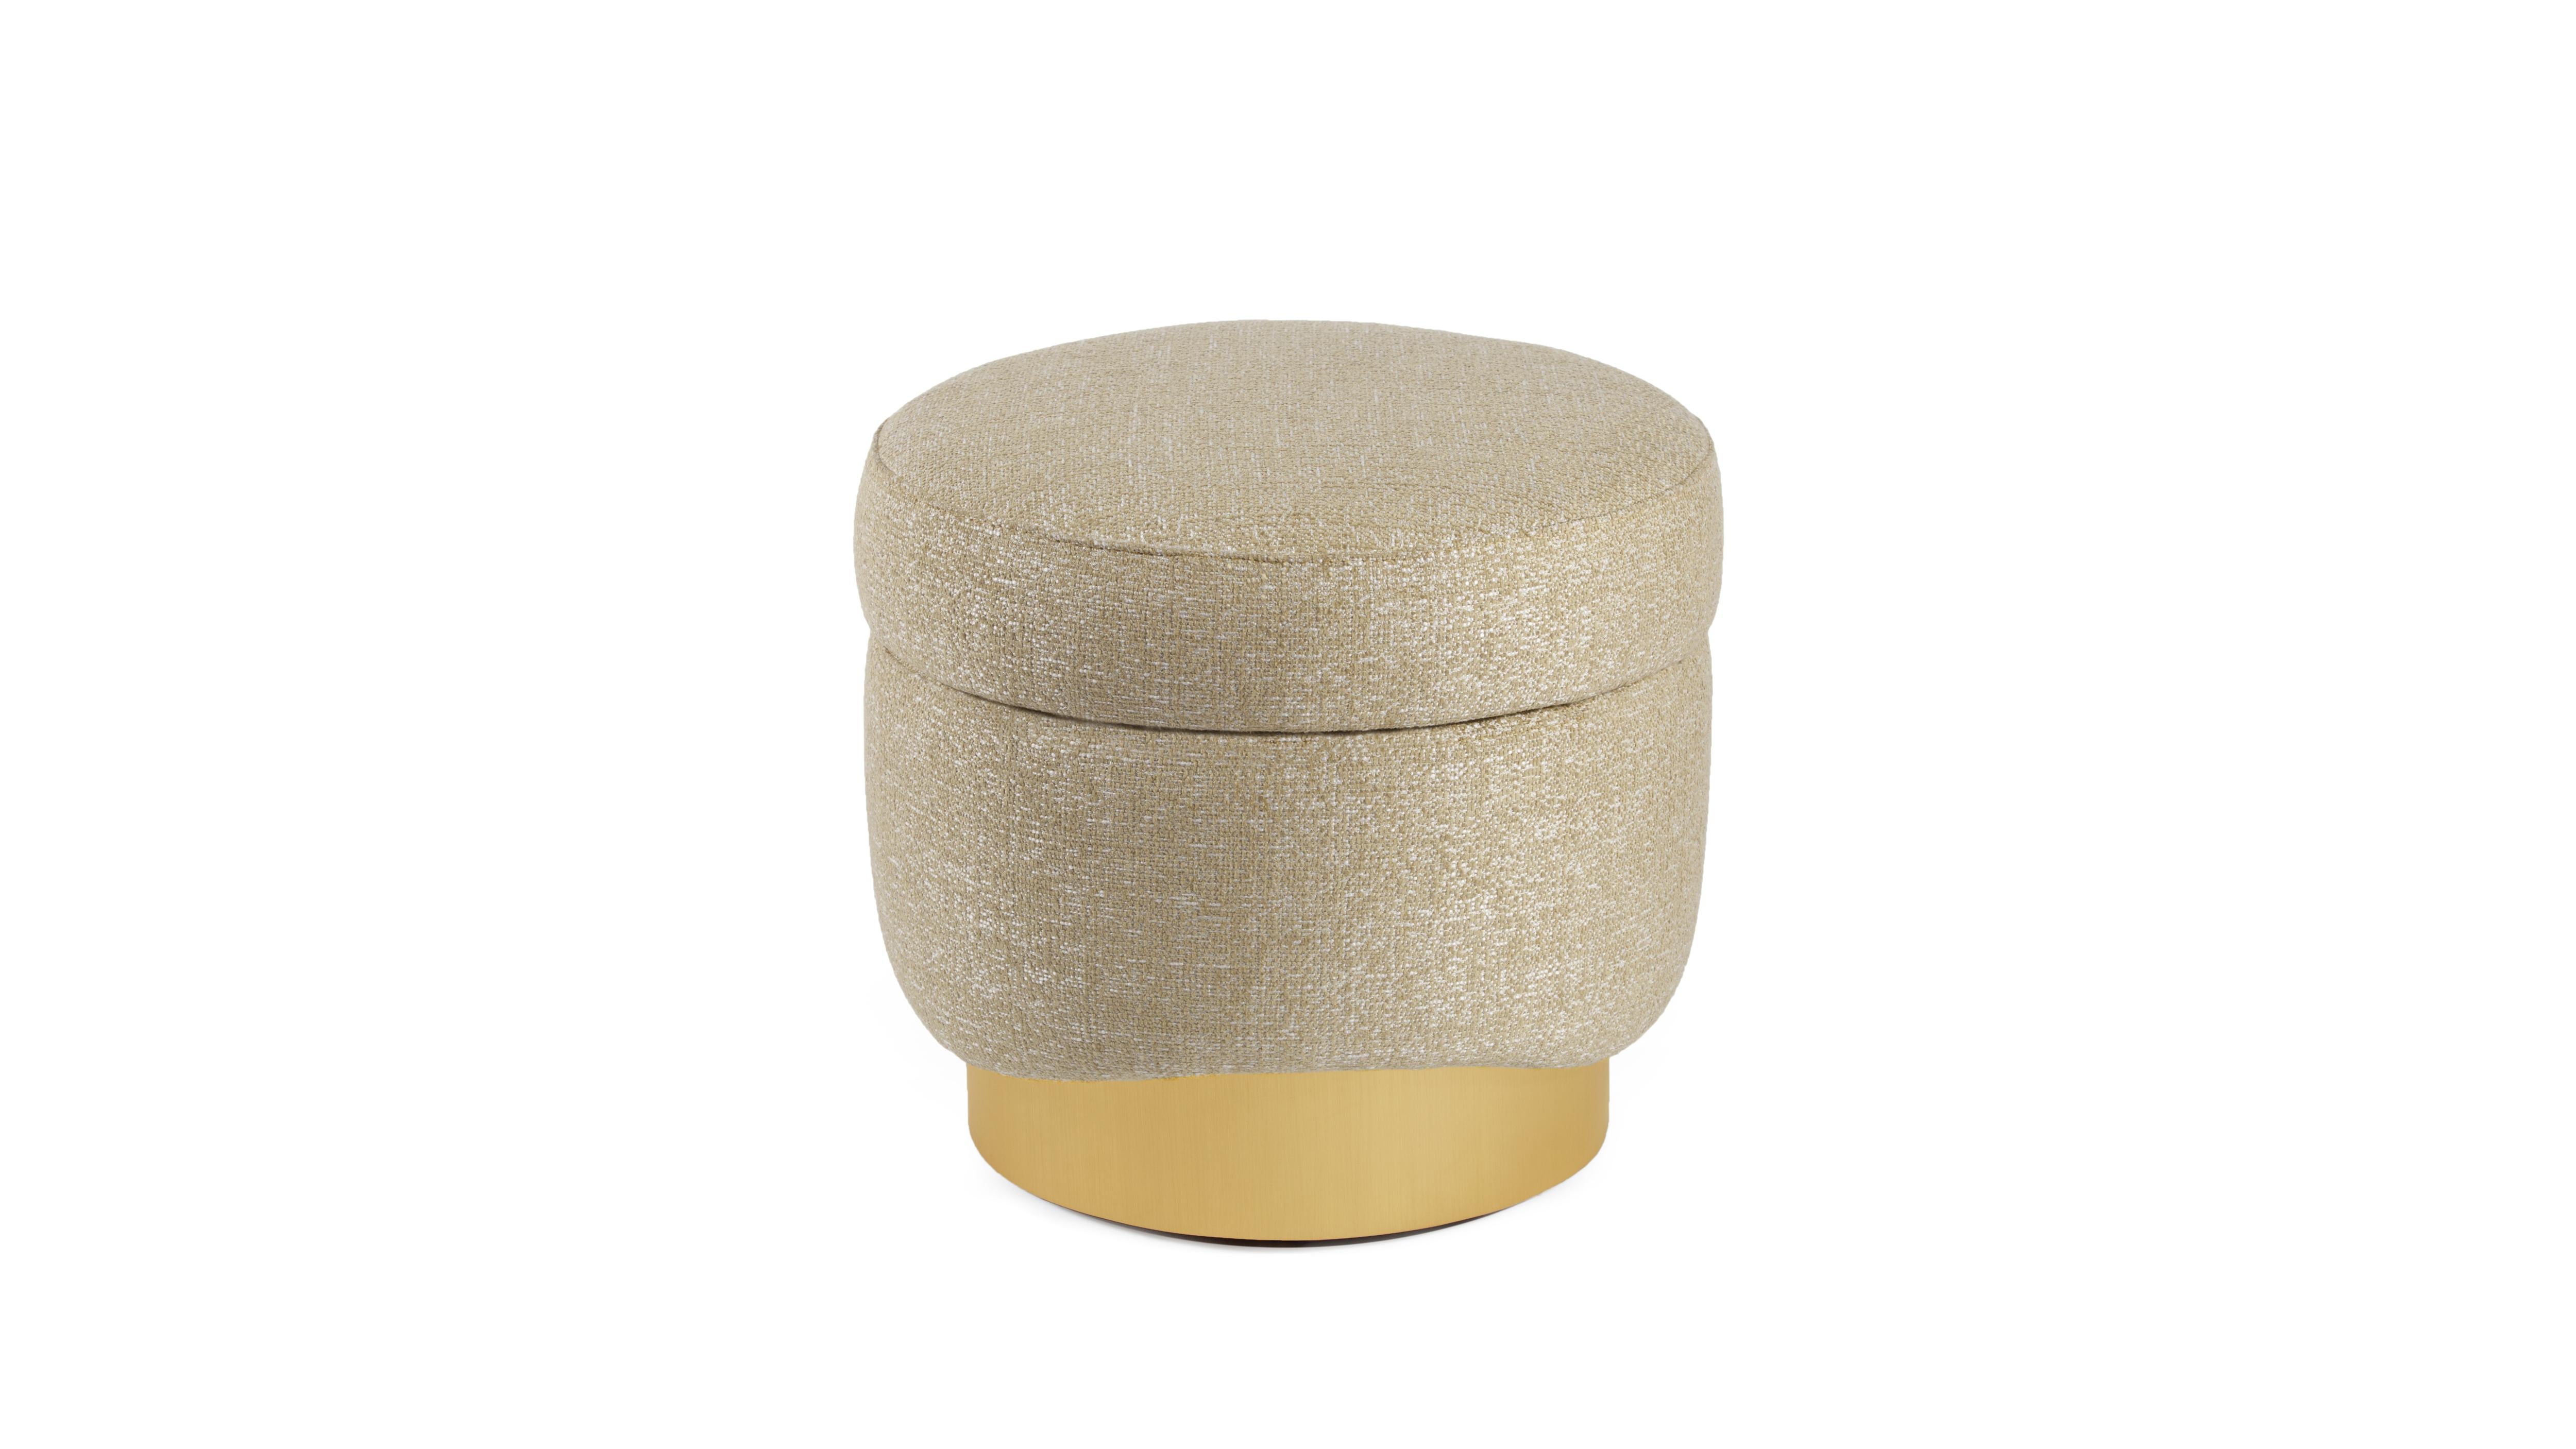 Figueroa Stool by InsidherLand
Dimensions: D 49 x W 49 x H 43 cm.
Materials: Brushed brass, InsidherLand Grainy I Ref. 1 fabric.
12 kg.
Available in different fabrics.

“Knowing Figueroa Mountain for so many years, I’ve always admired it as an